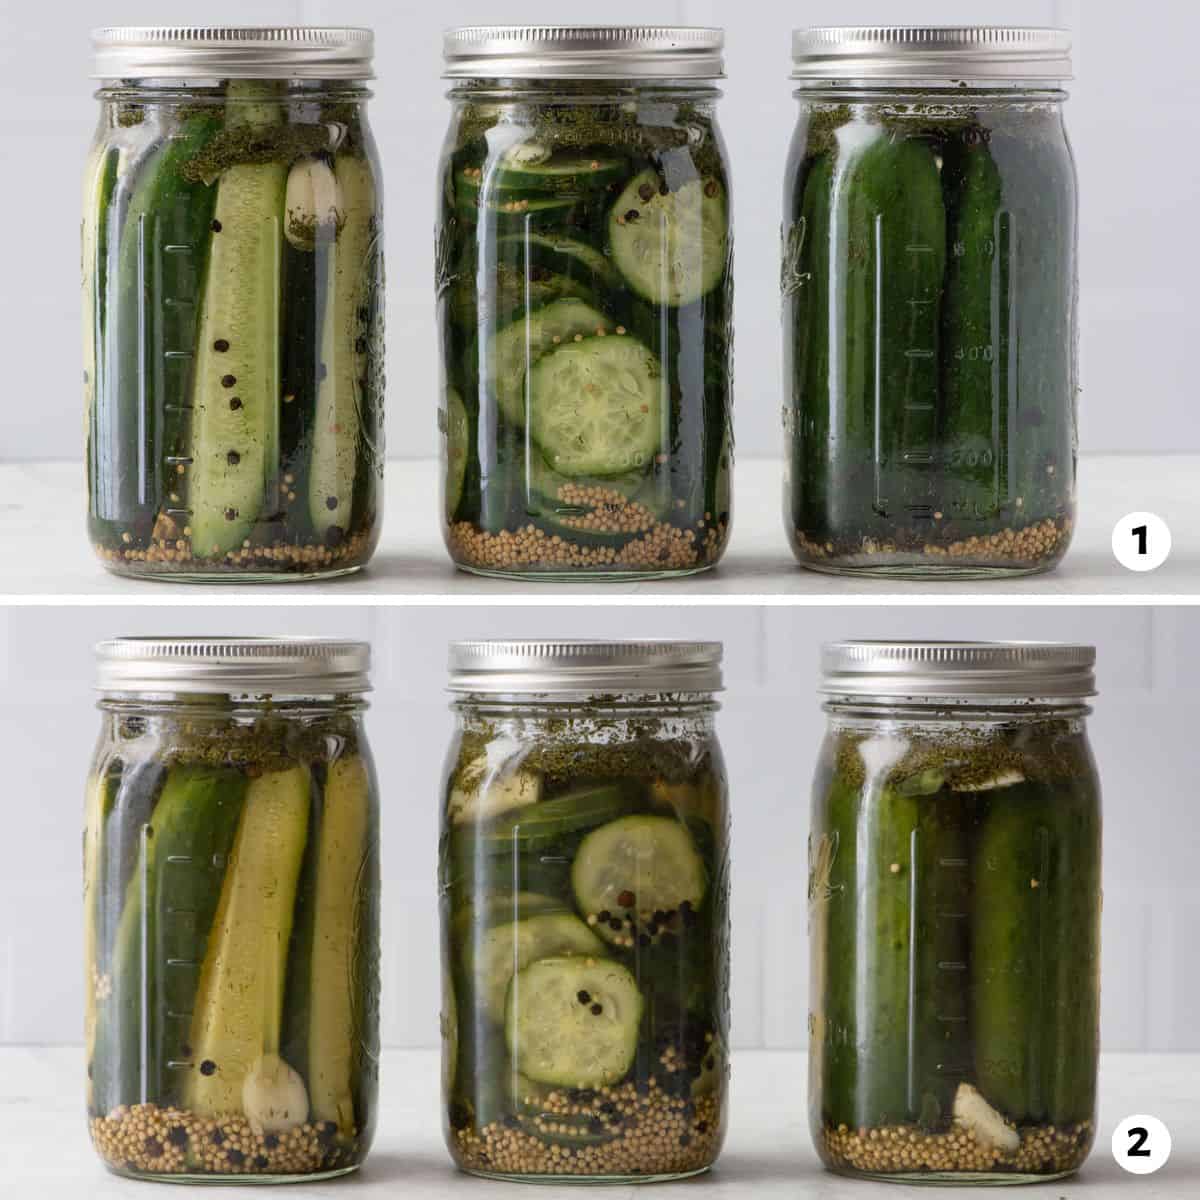 2 image collage of pickle spears, slices, and whole cucumbers before and after a 1 day brine.